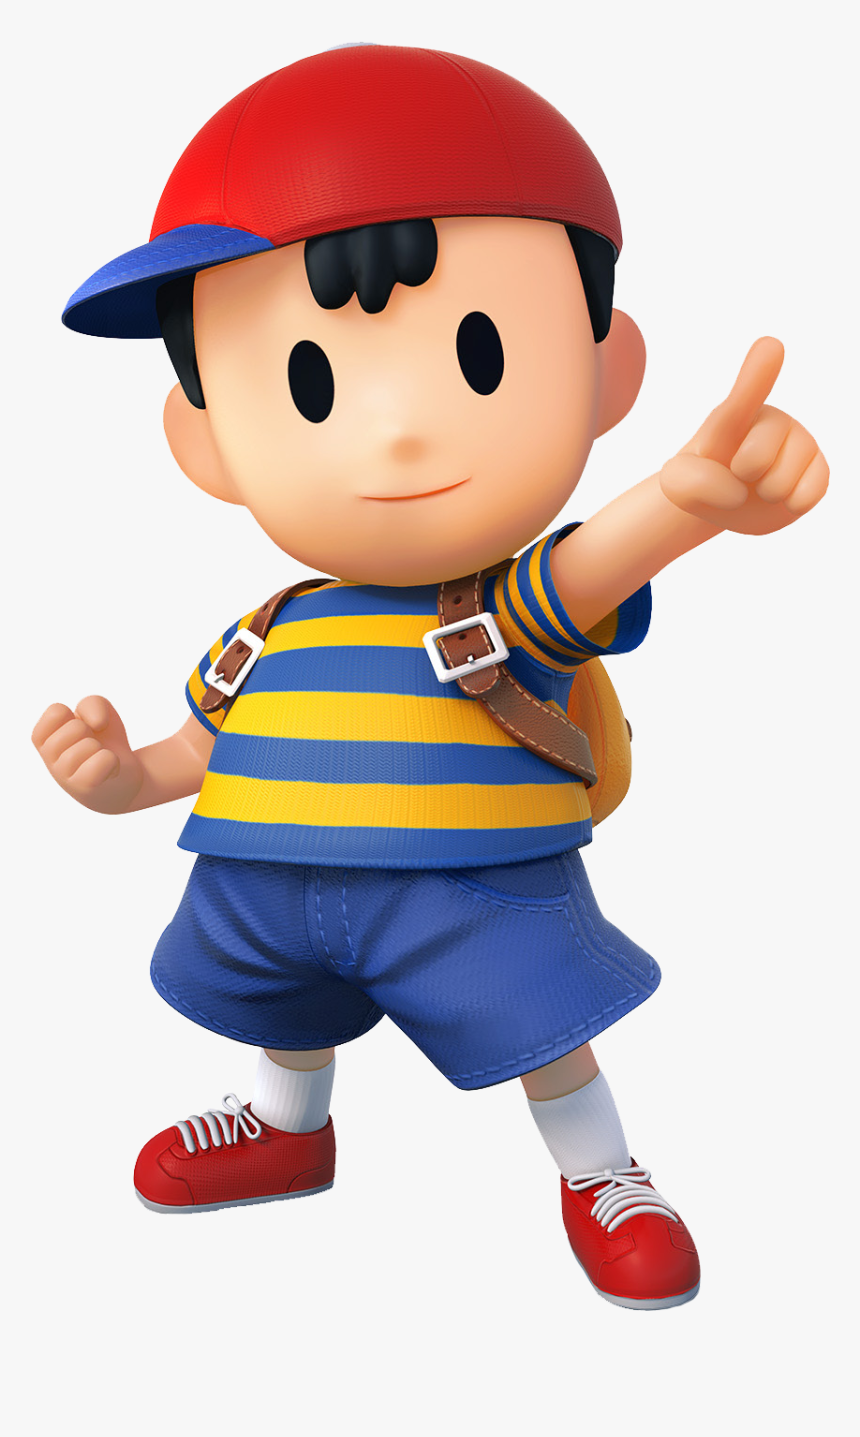 Hd This Is Okey - Smash 4 Ness Render, HD Png Download, Free Download